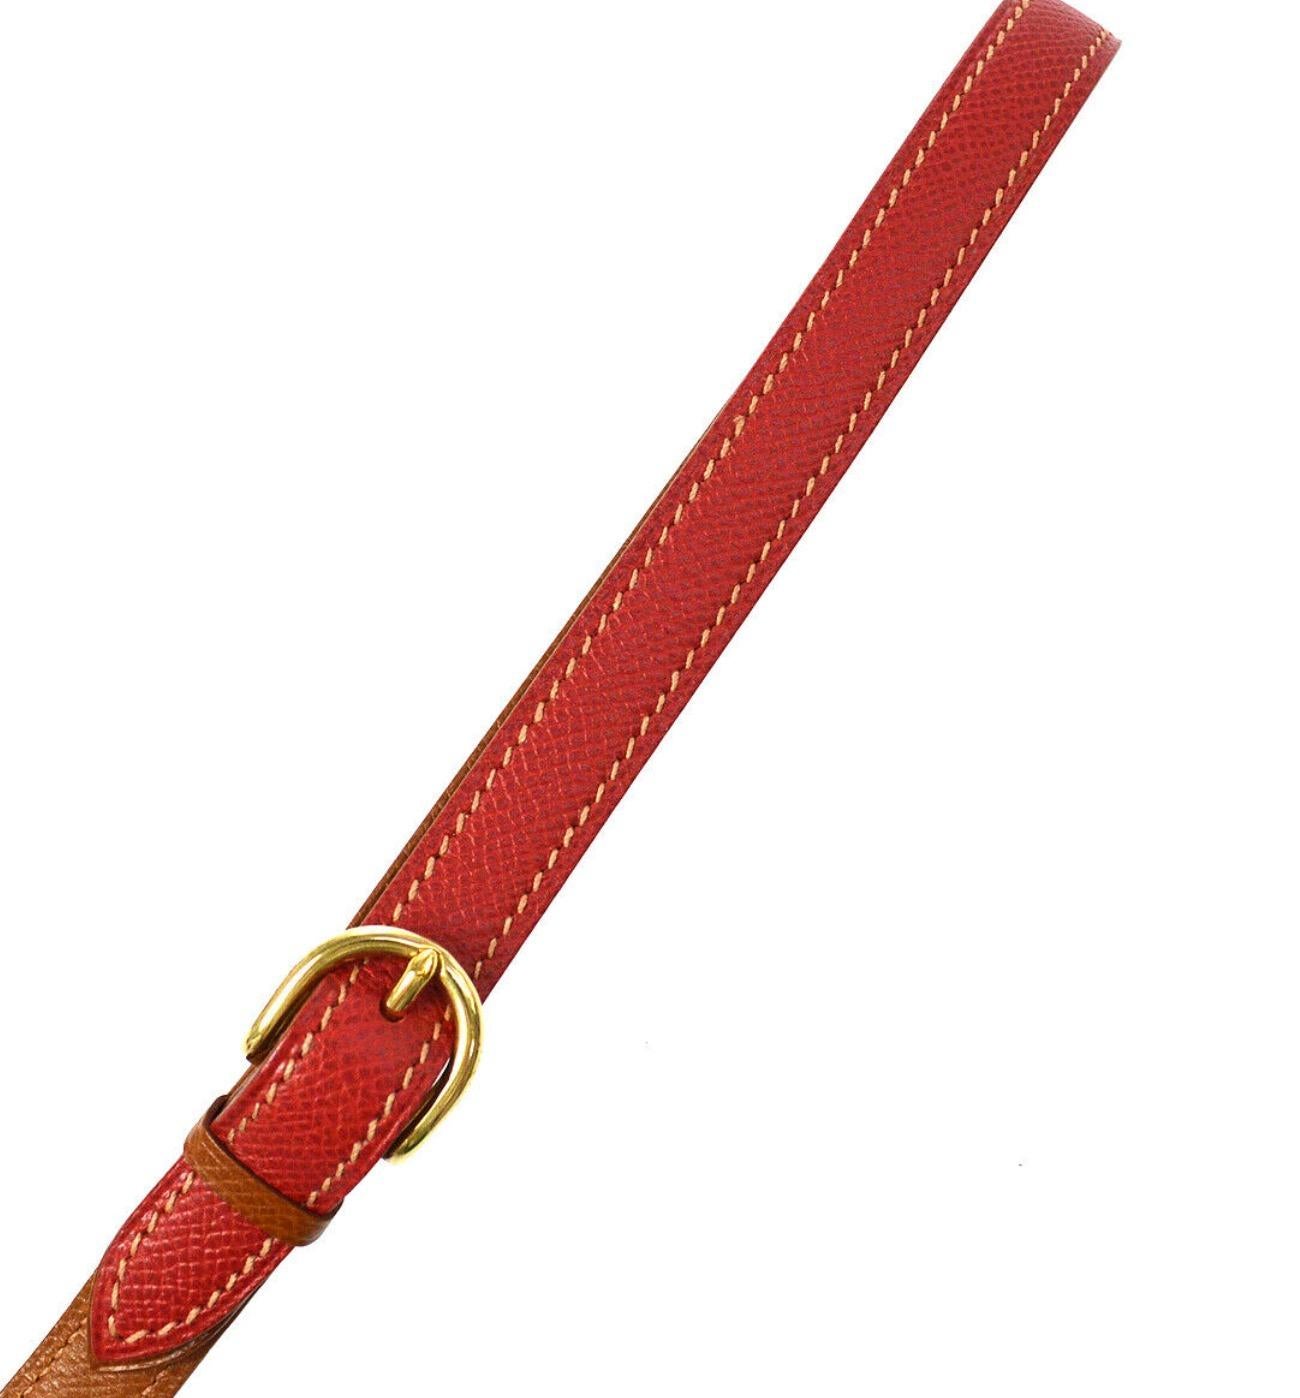 
Leather
Gold tone hardware
Made in France
Leash length 40